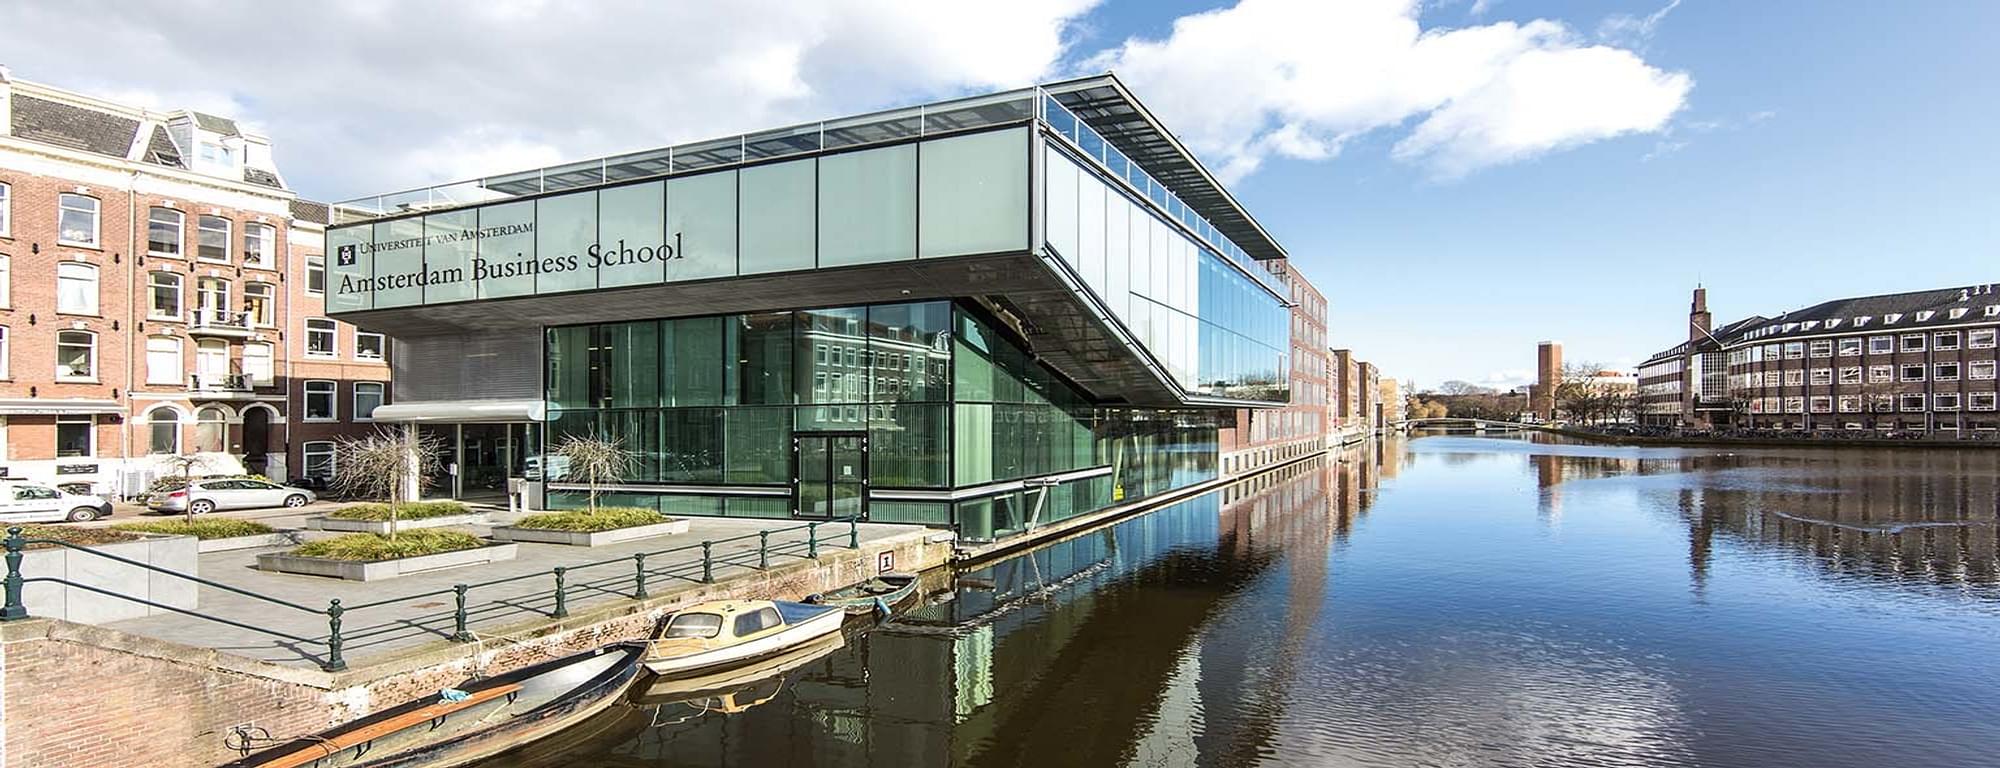 Amsterdam Business School [ABS], Amsterdam Courses, Fees, Ranking, &  Admission Criteria